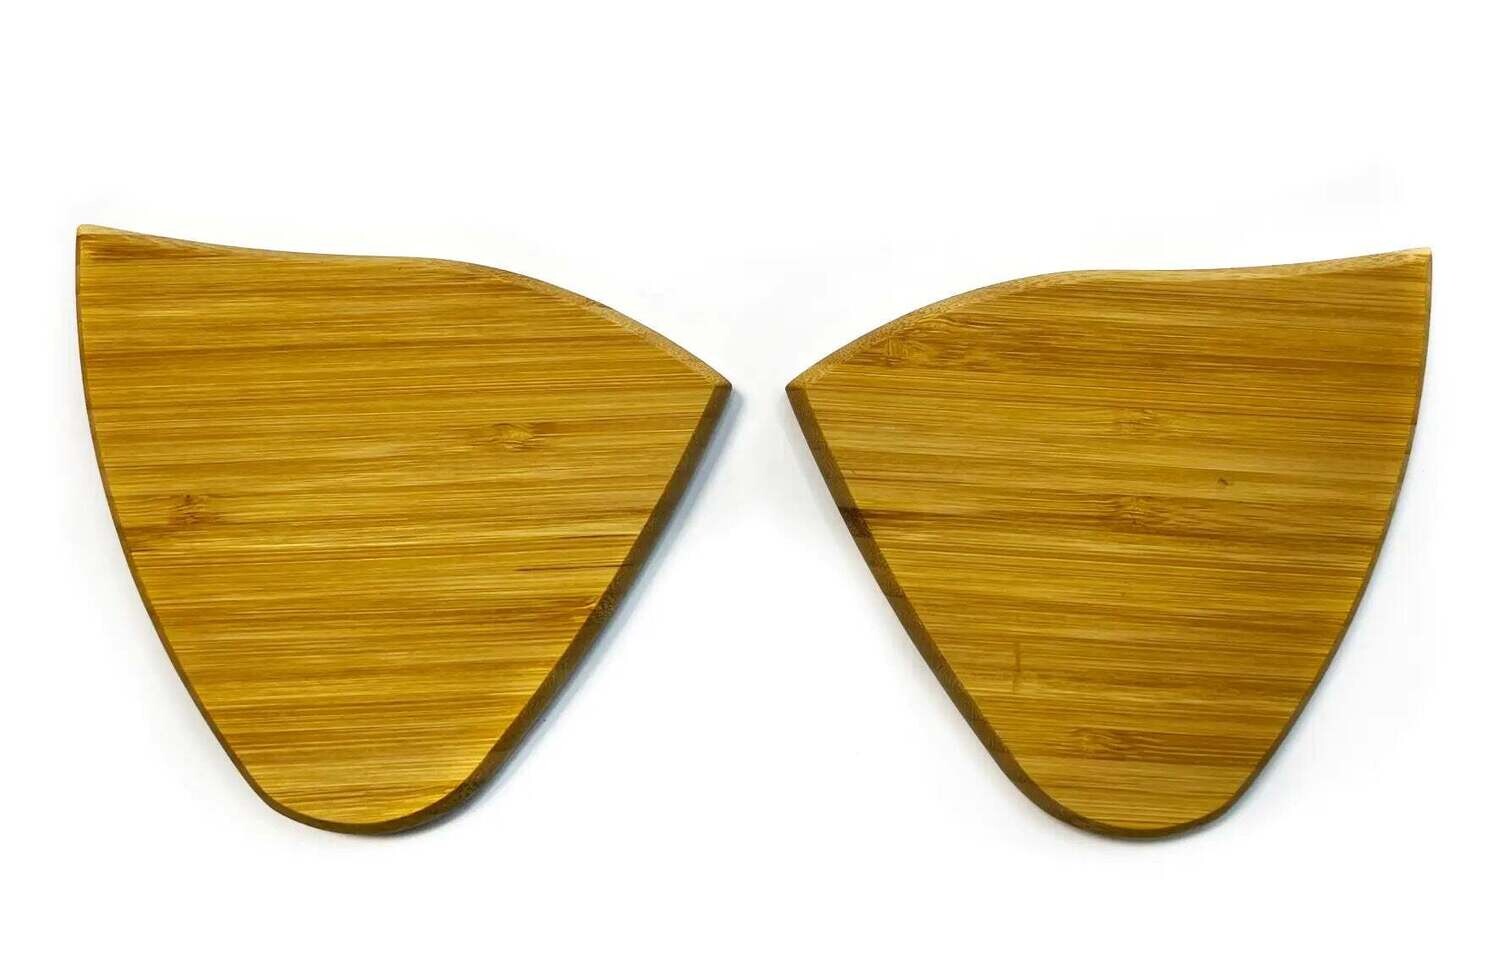 Set of wooden wrist rests for Kyria keyboard - Bamboo